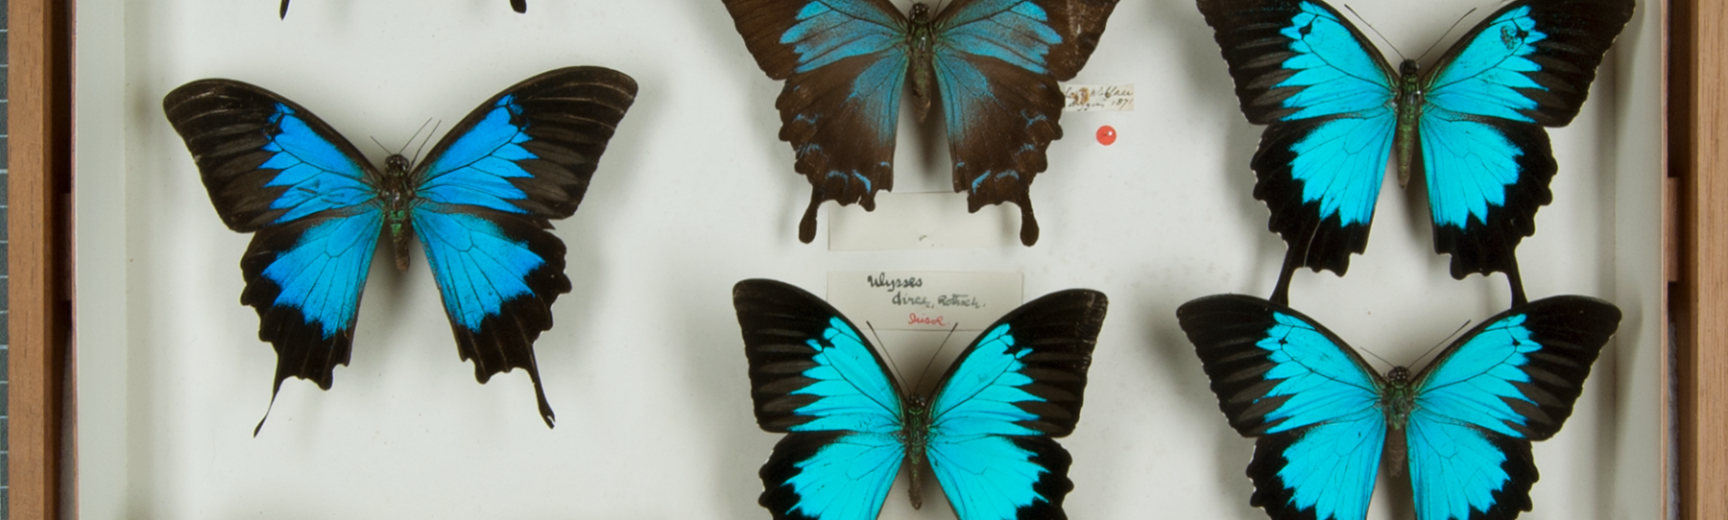 Alfred Russel Wallace collection at the Museum of Natural History